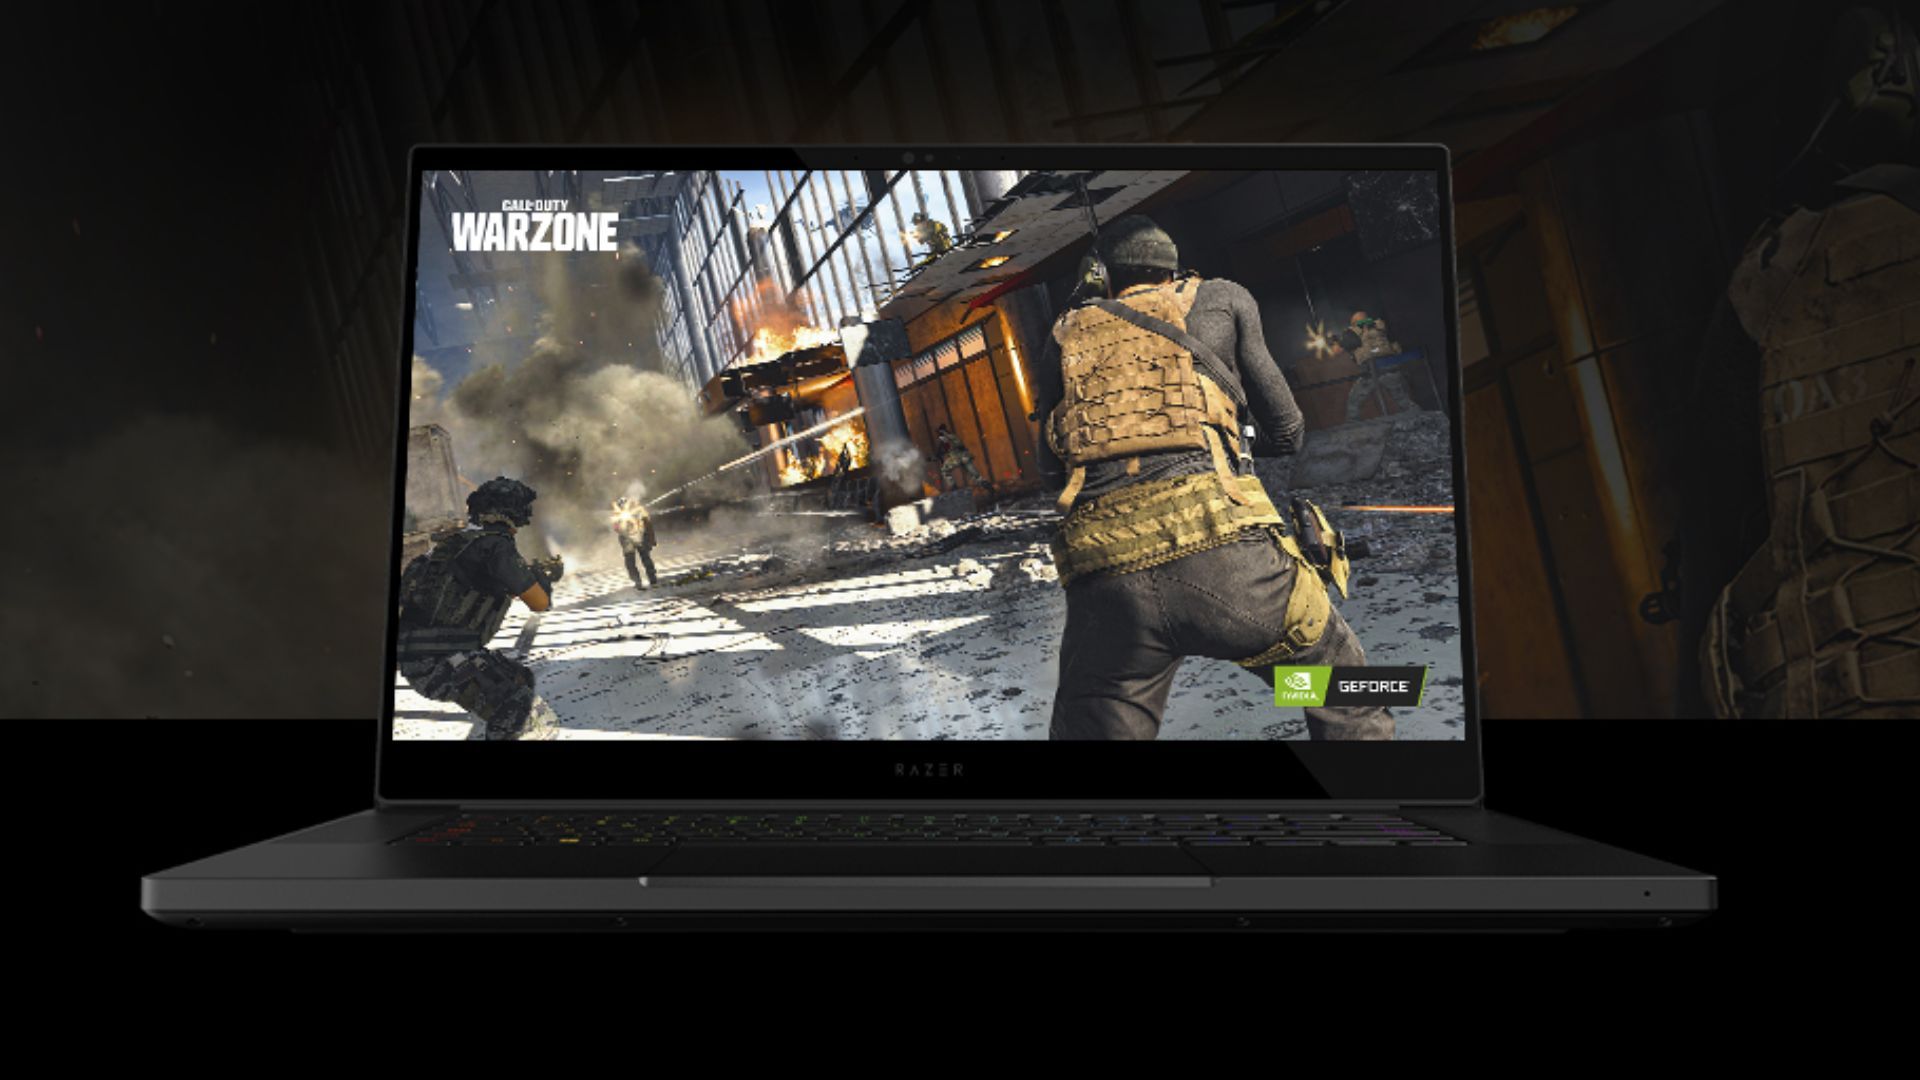 call of duty warzone running on a razer gaming laptop